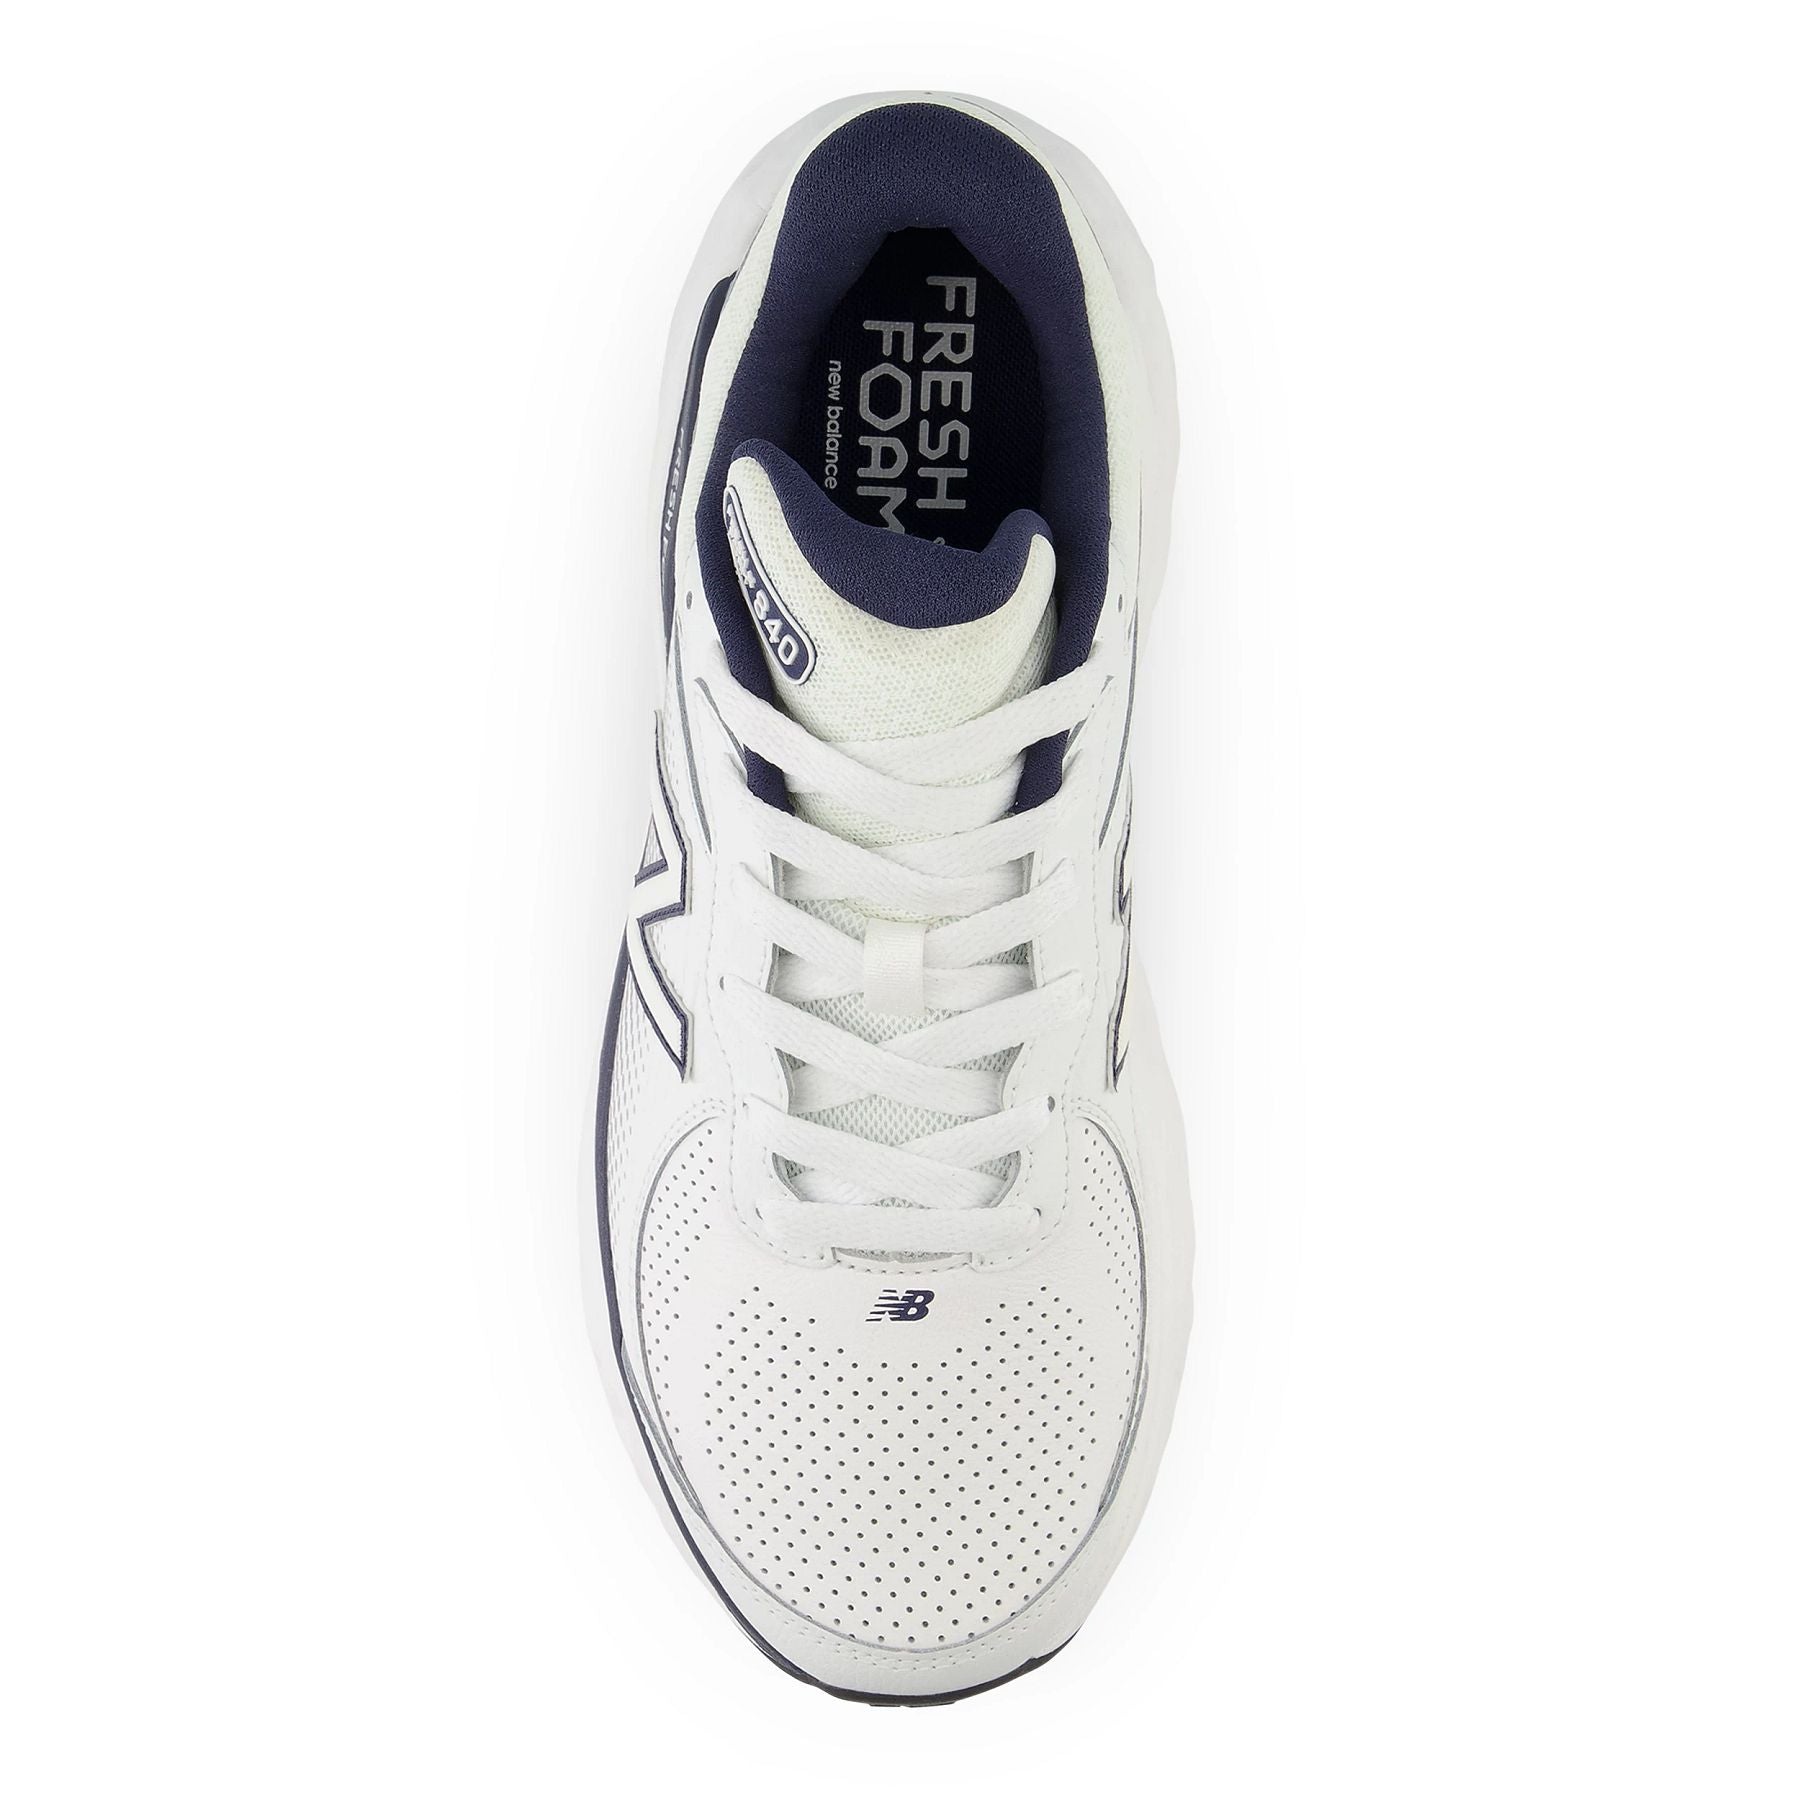 Top view of the Men's Leather New Balance MW840 V1 in White/Navy